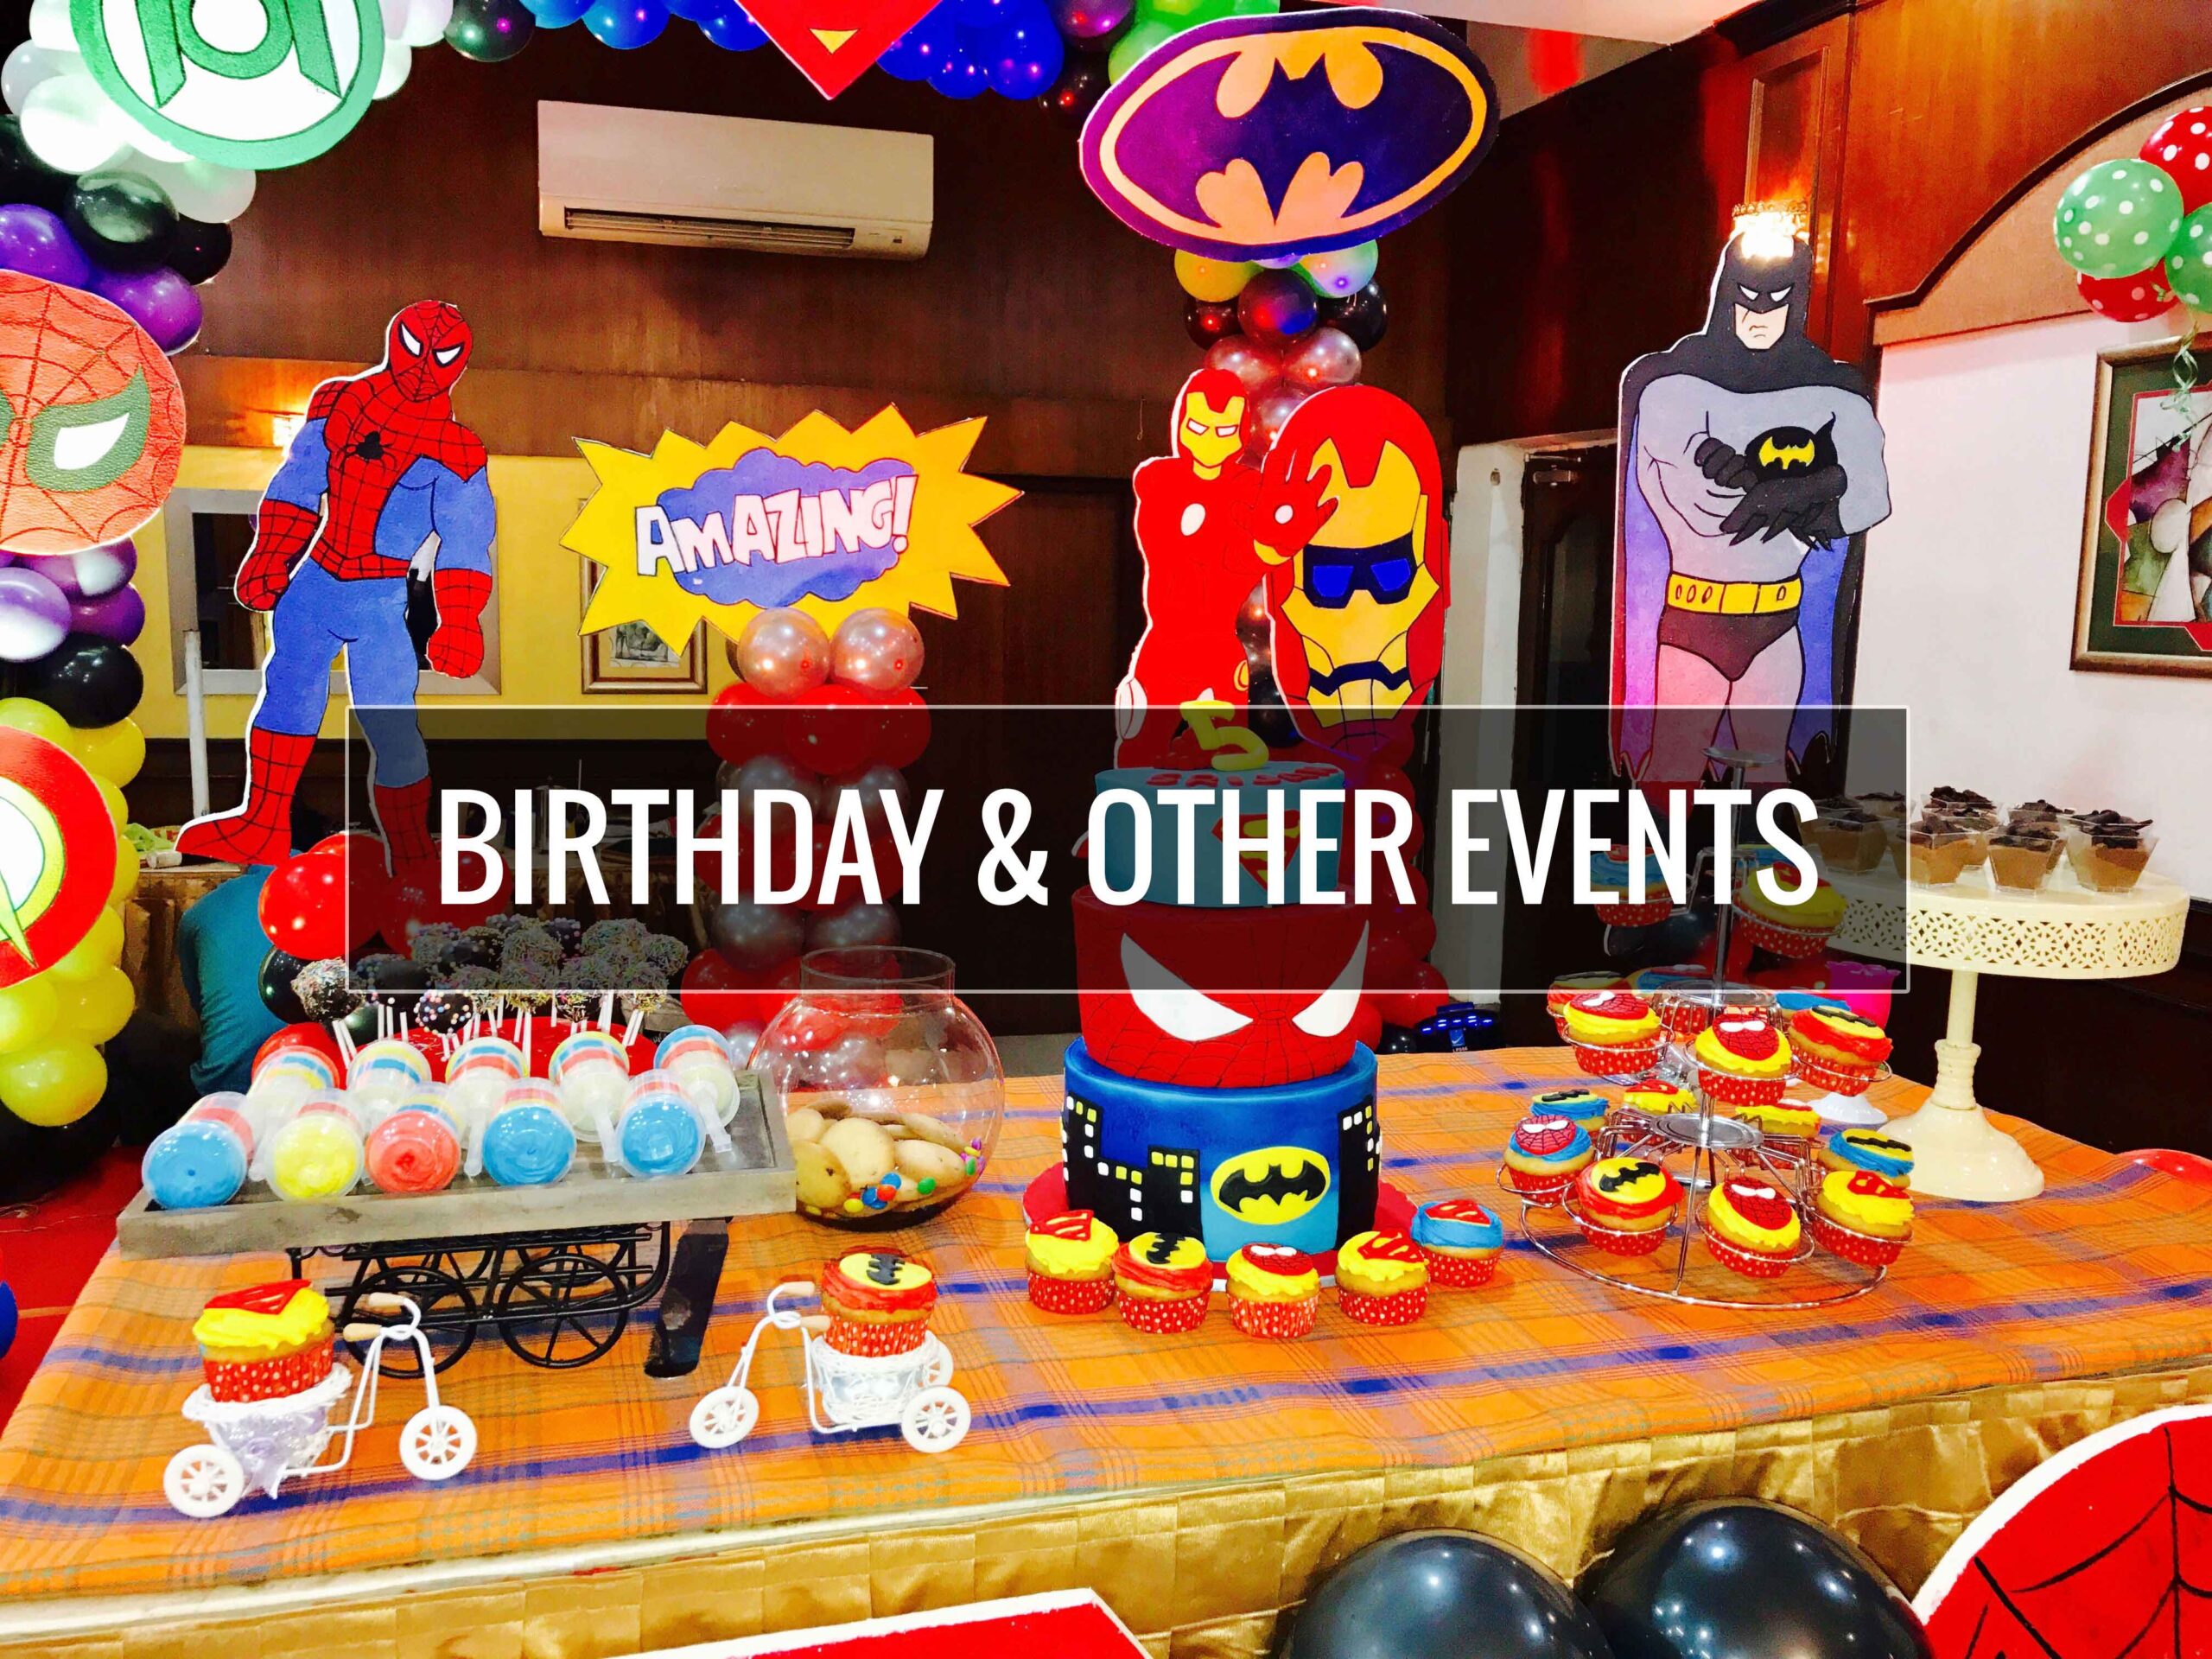 BIRTHDAY & OTHER EVENTS